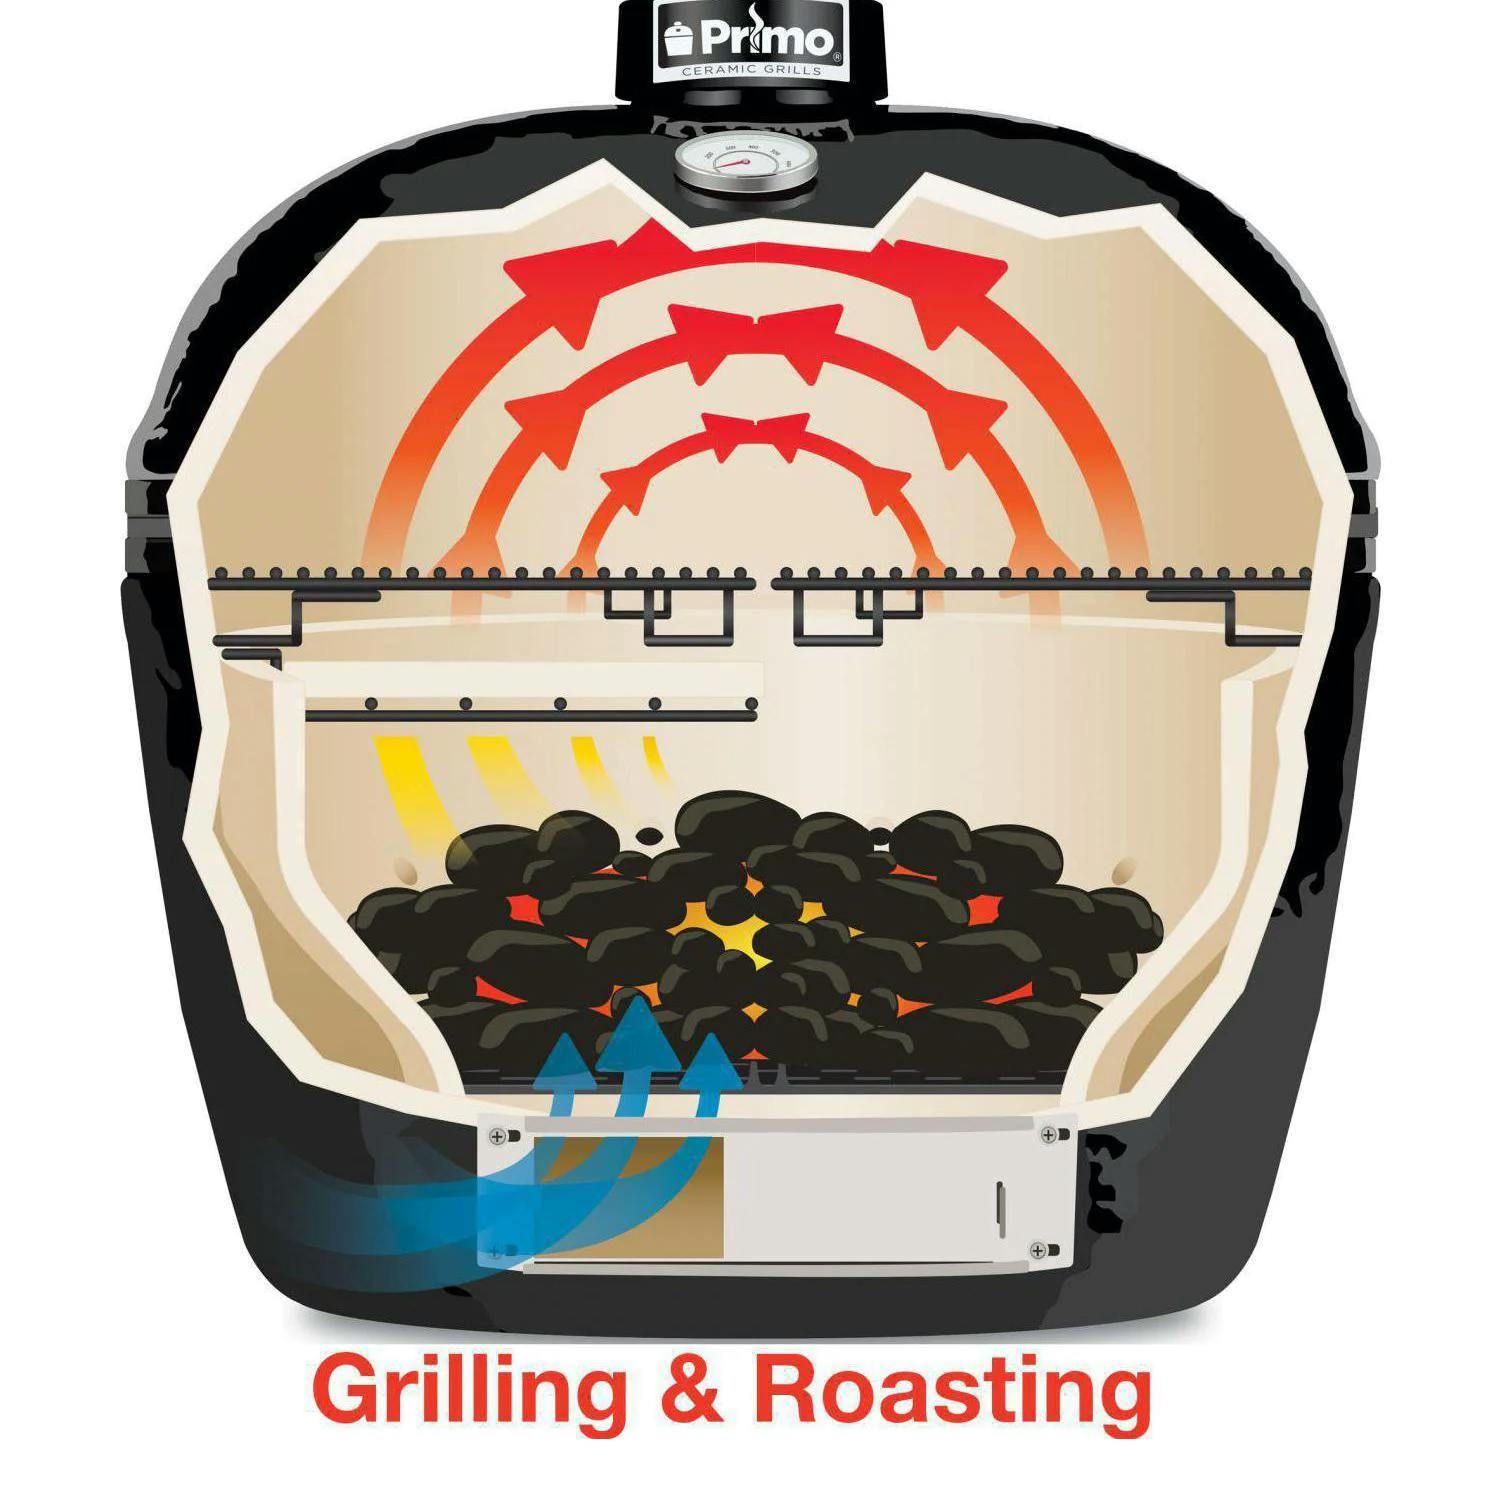 Primo Oval 400 Ceramic Kamado Grill with Stainless Steel Grates